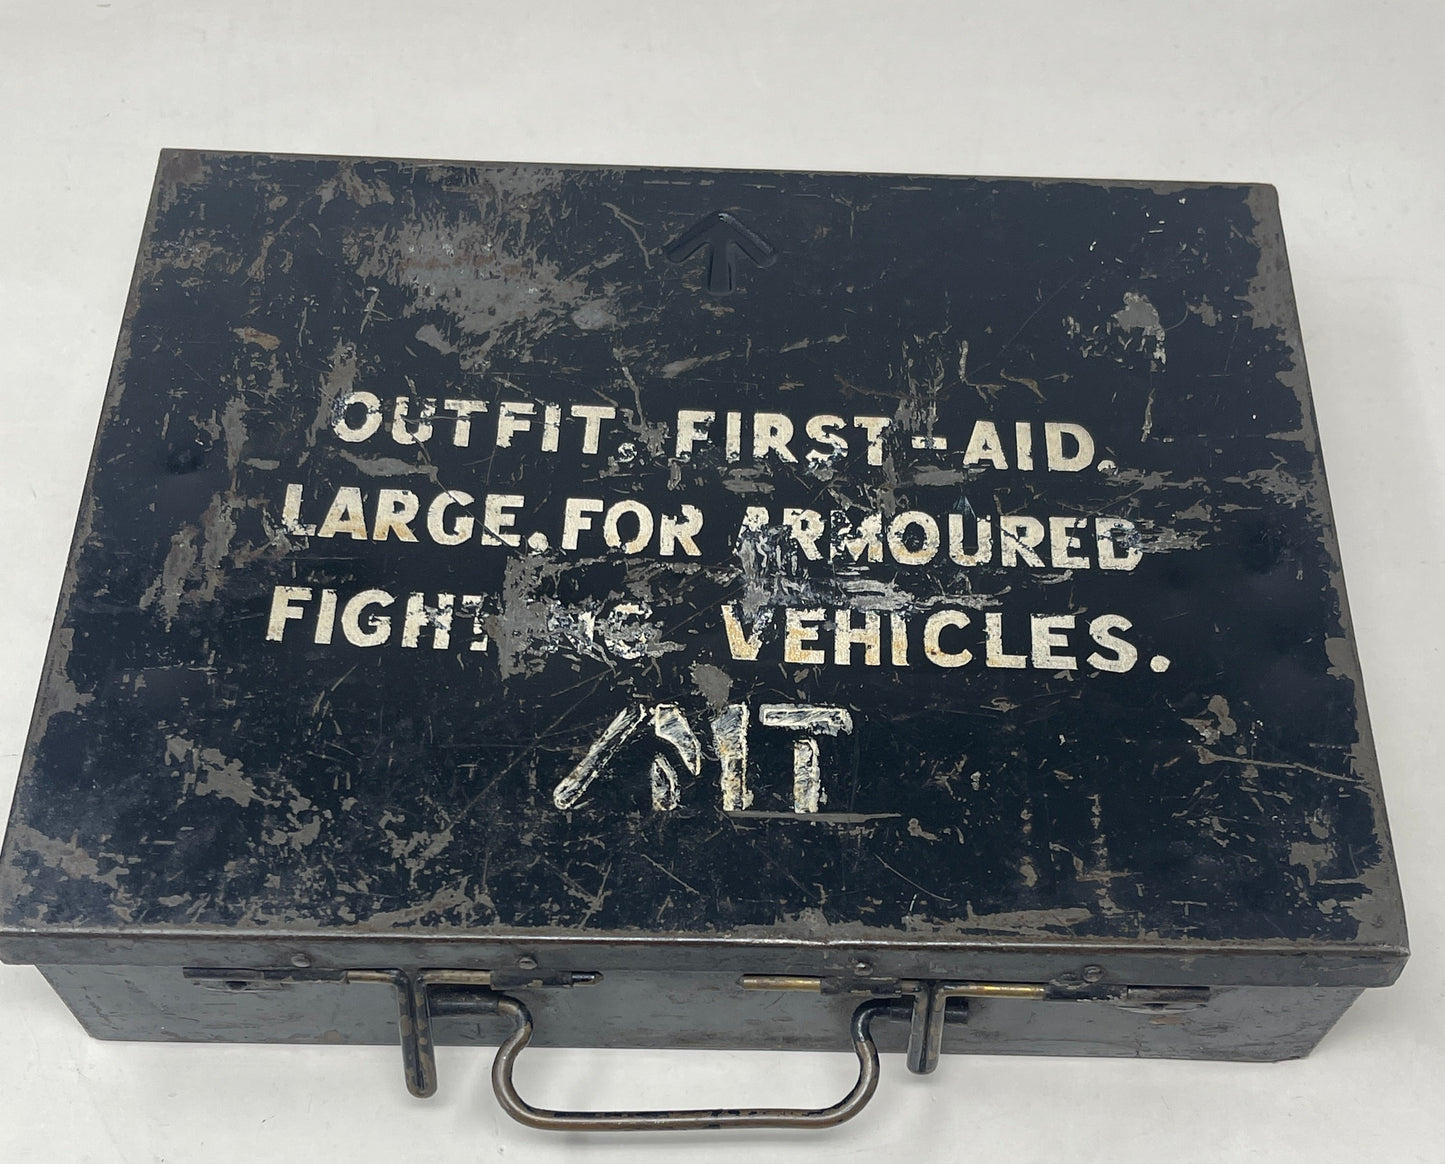 Outfit First Aid Large, For Armoured Fighting Vehicles